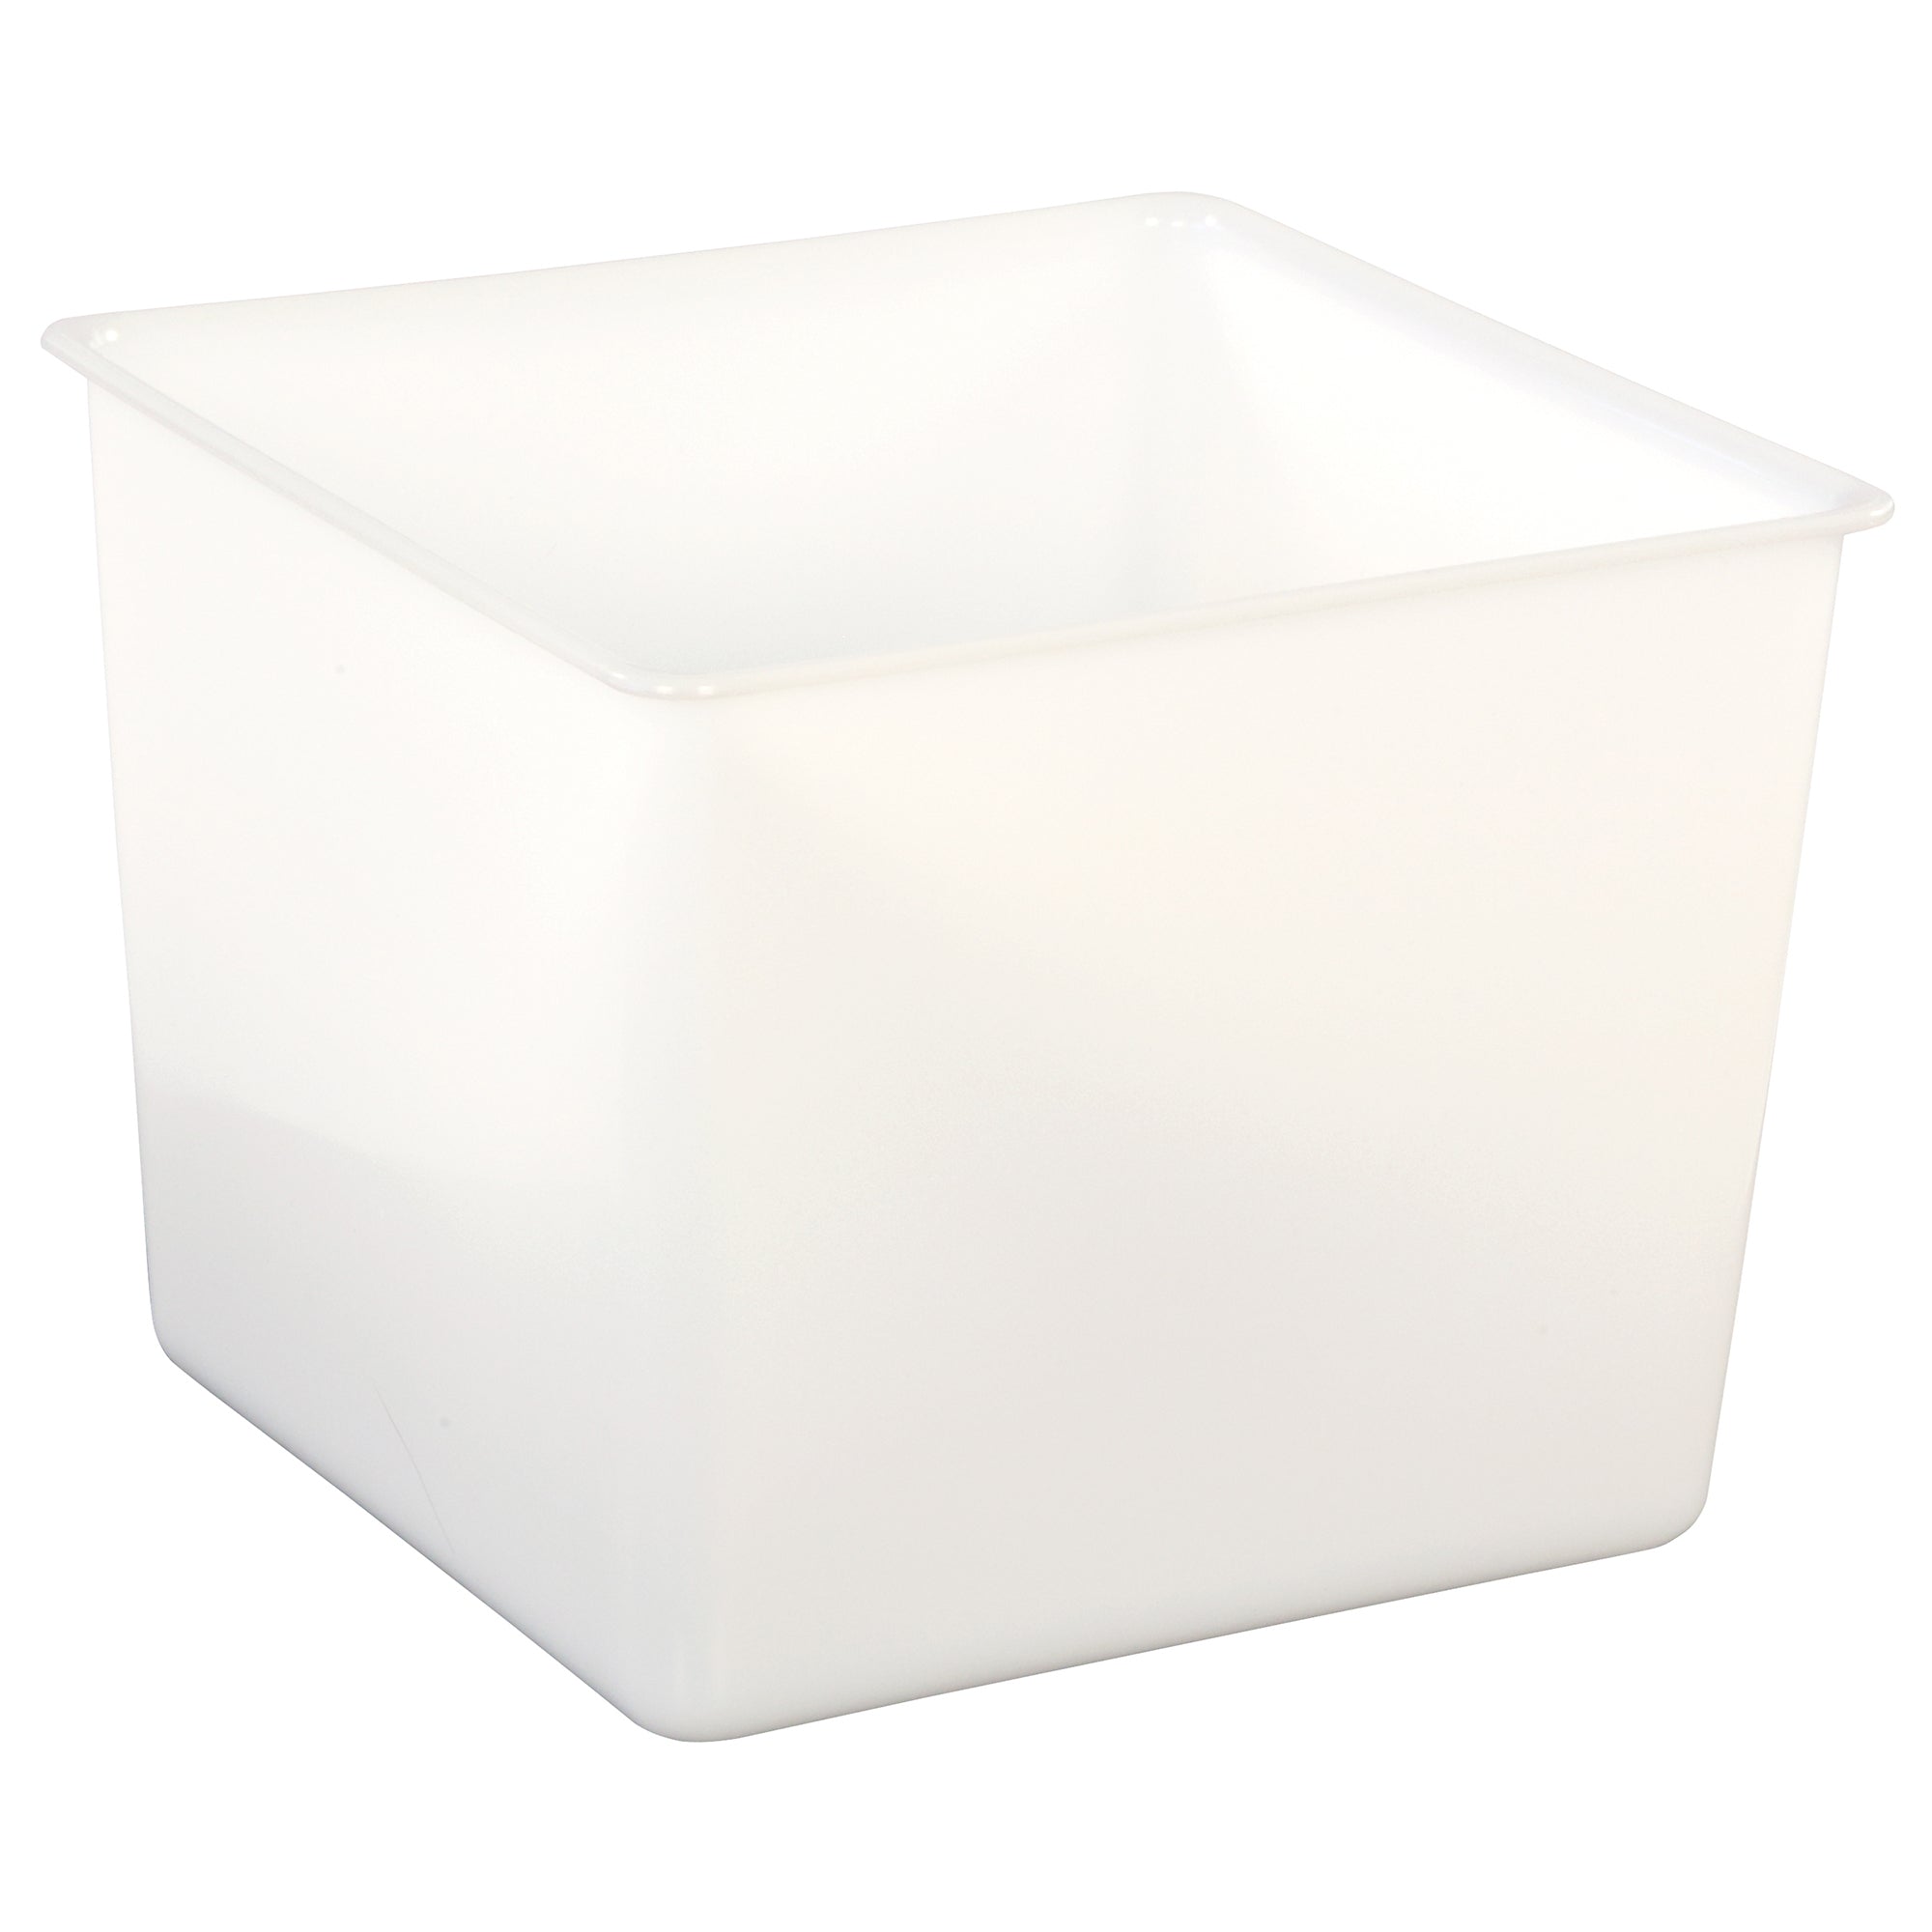 Opaque Organizational Small Bins For Child Learning Storage.